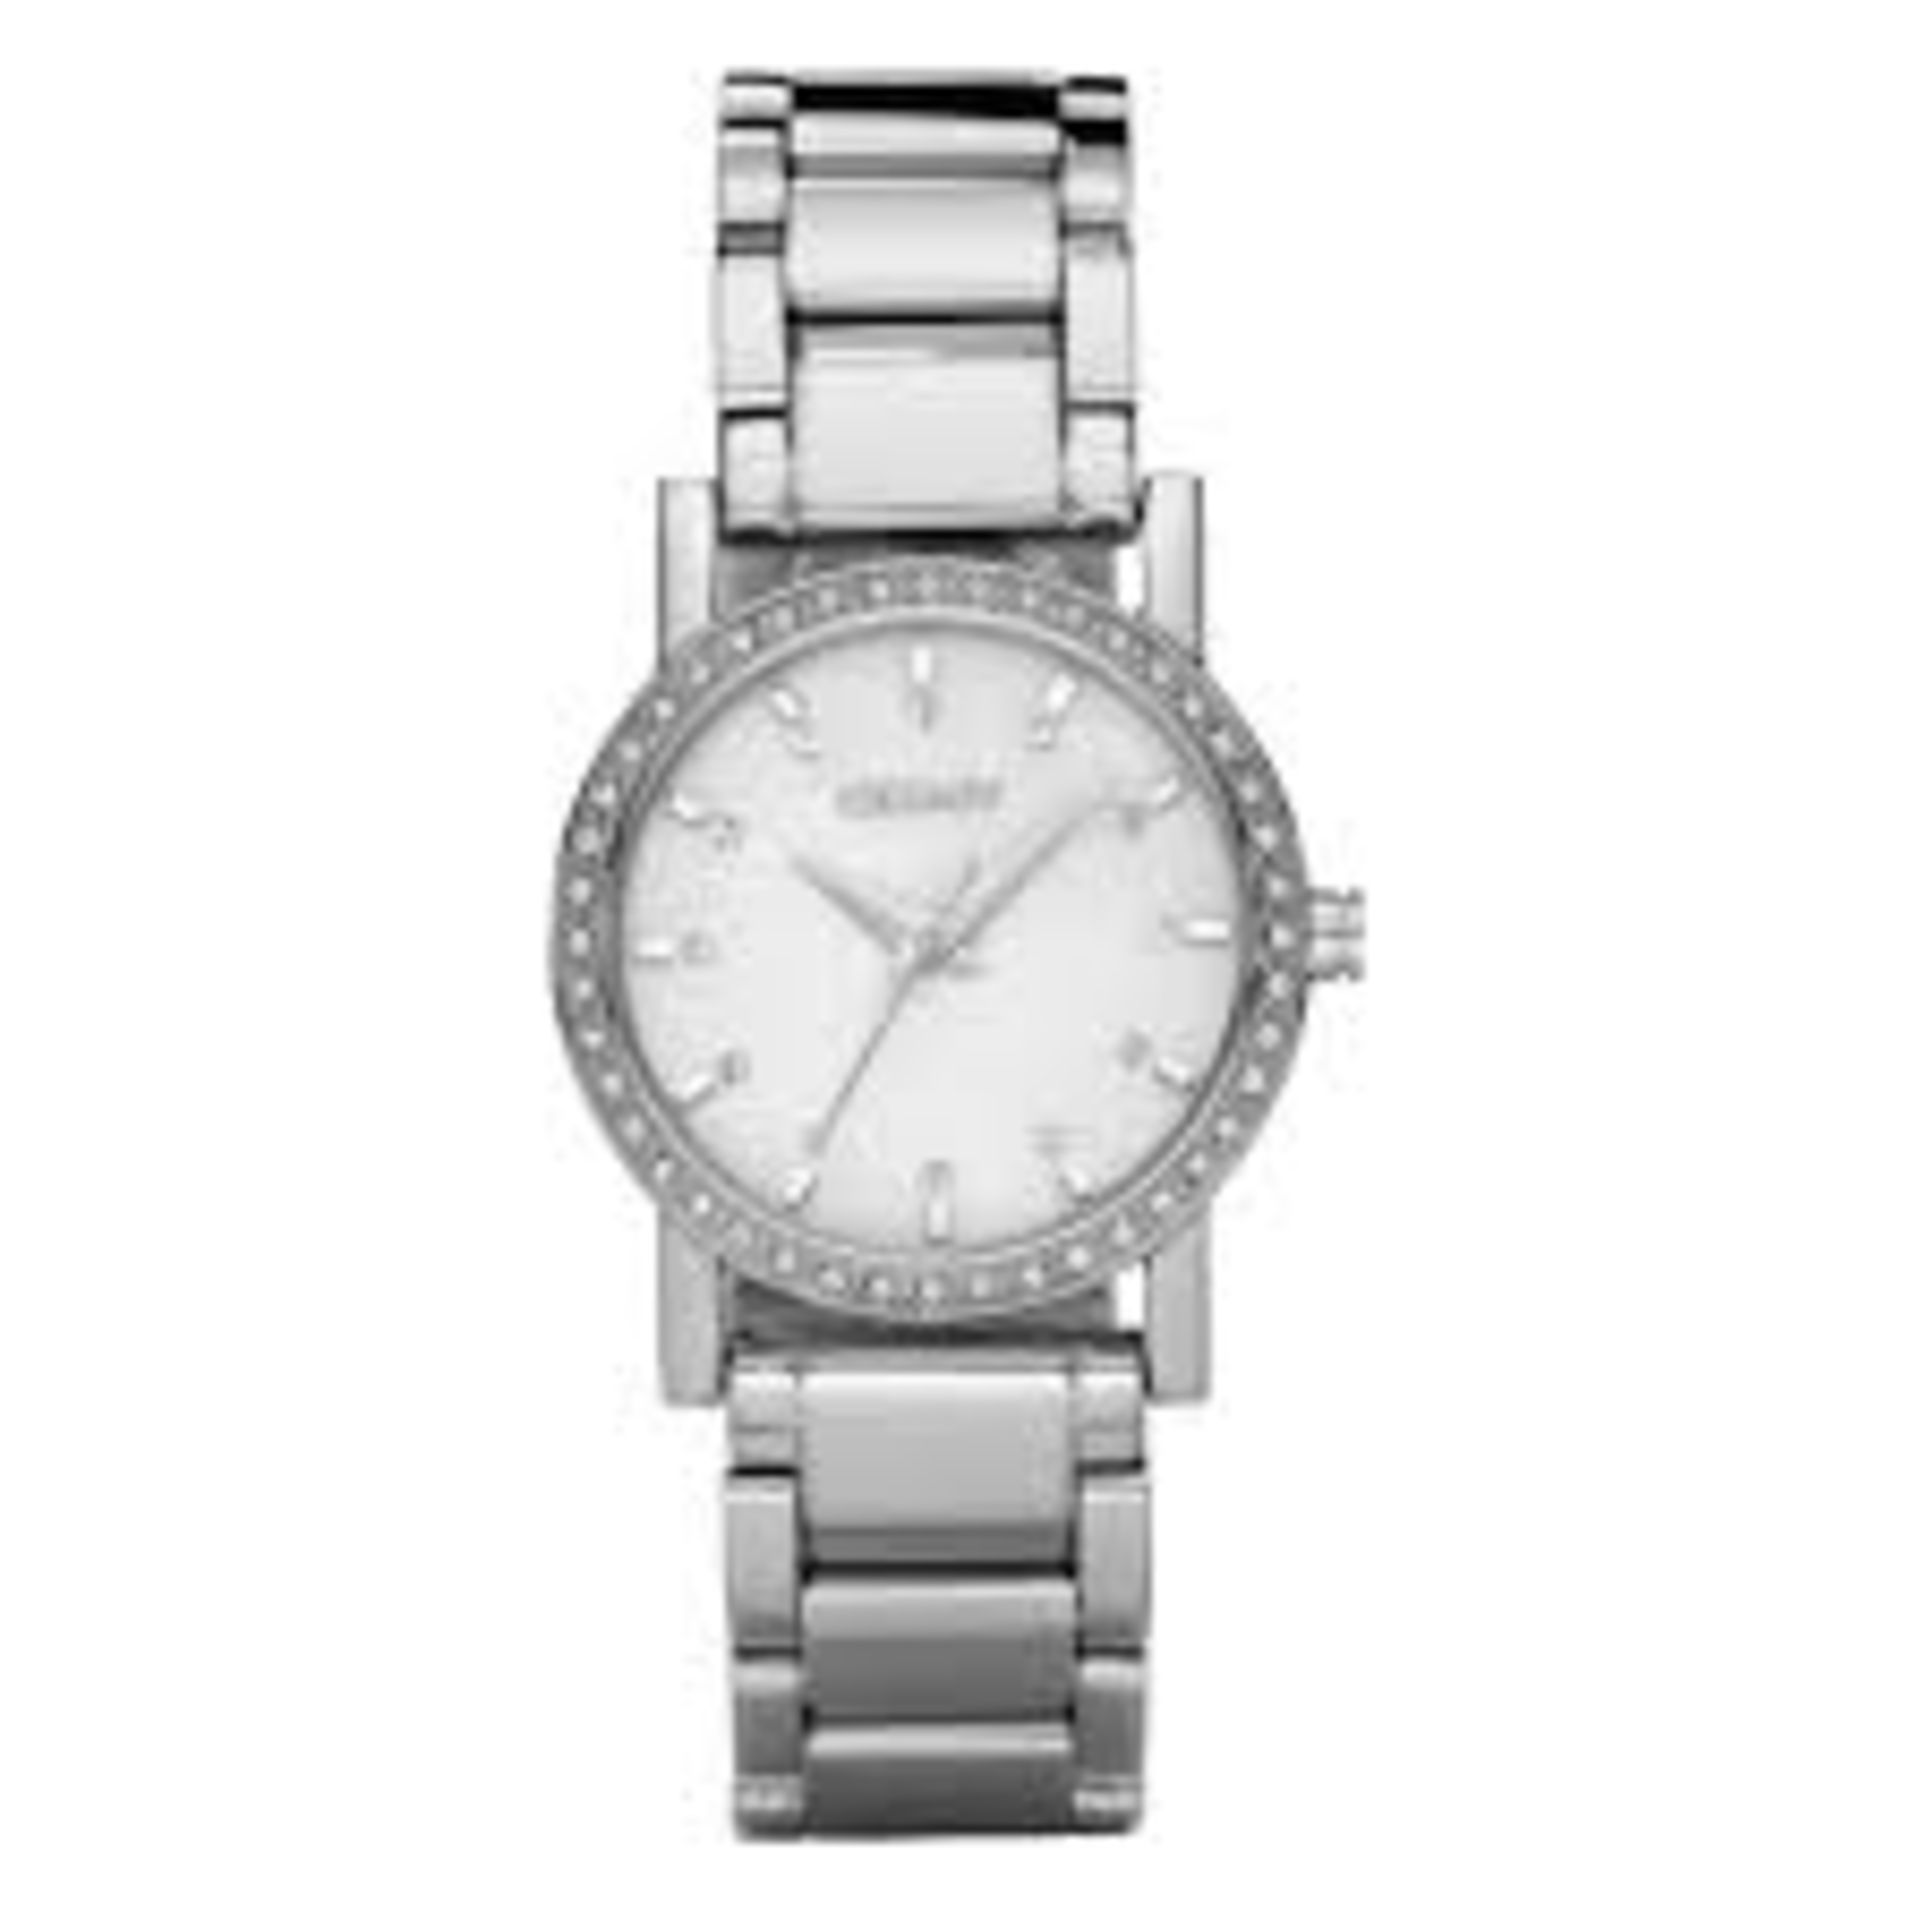 Ladies DKNy watch, model number NY4791. Stainless steel with round face and mother of pearl dial.